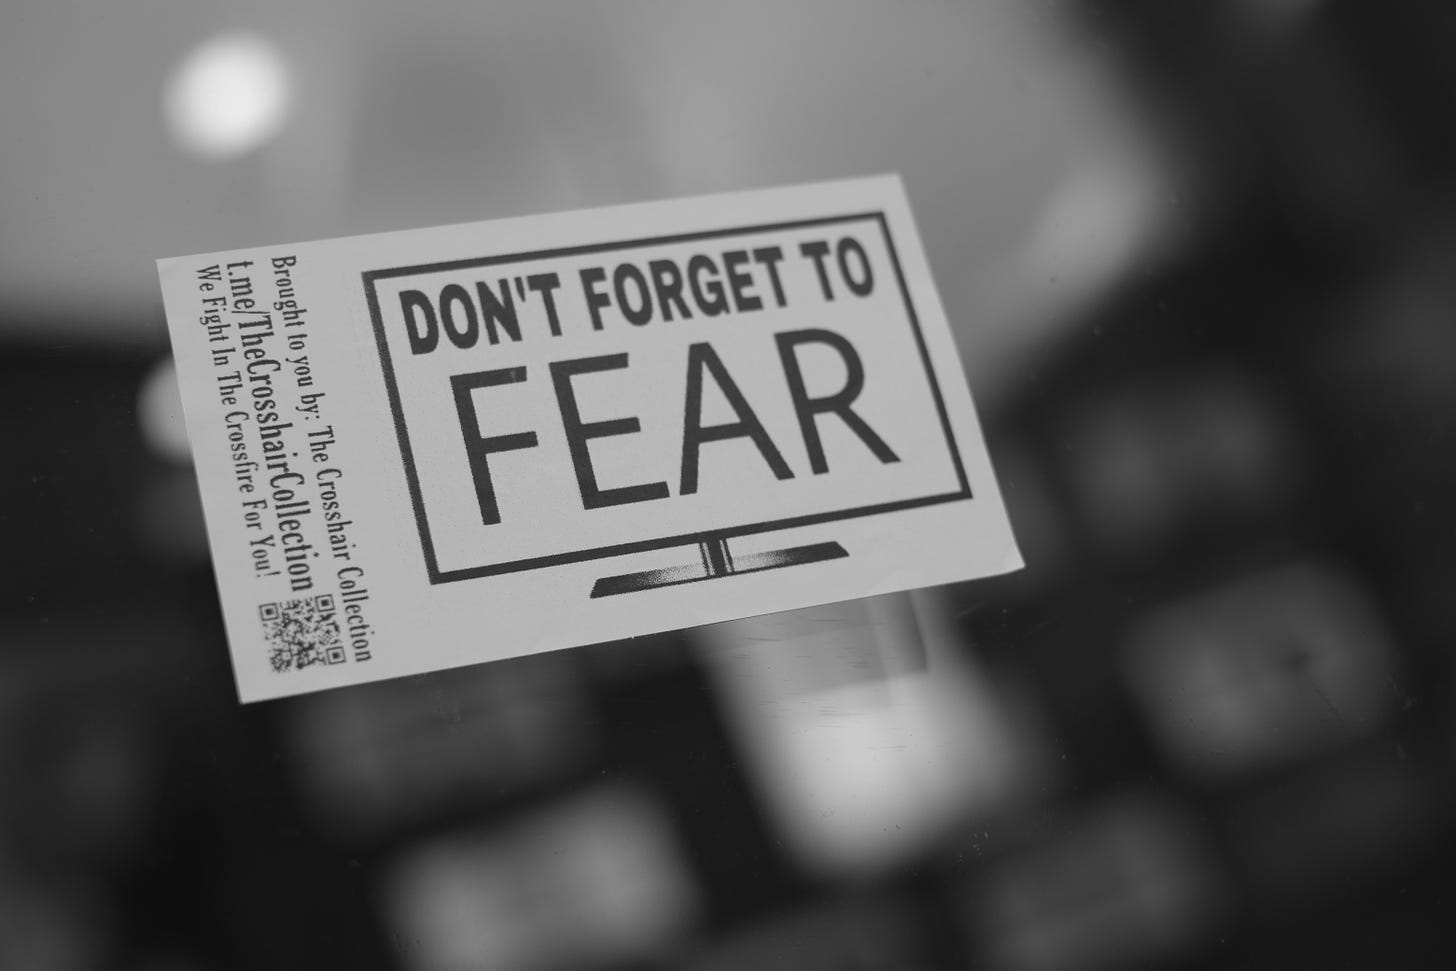 Don't forget to FEAR